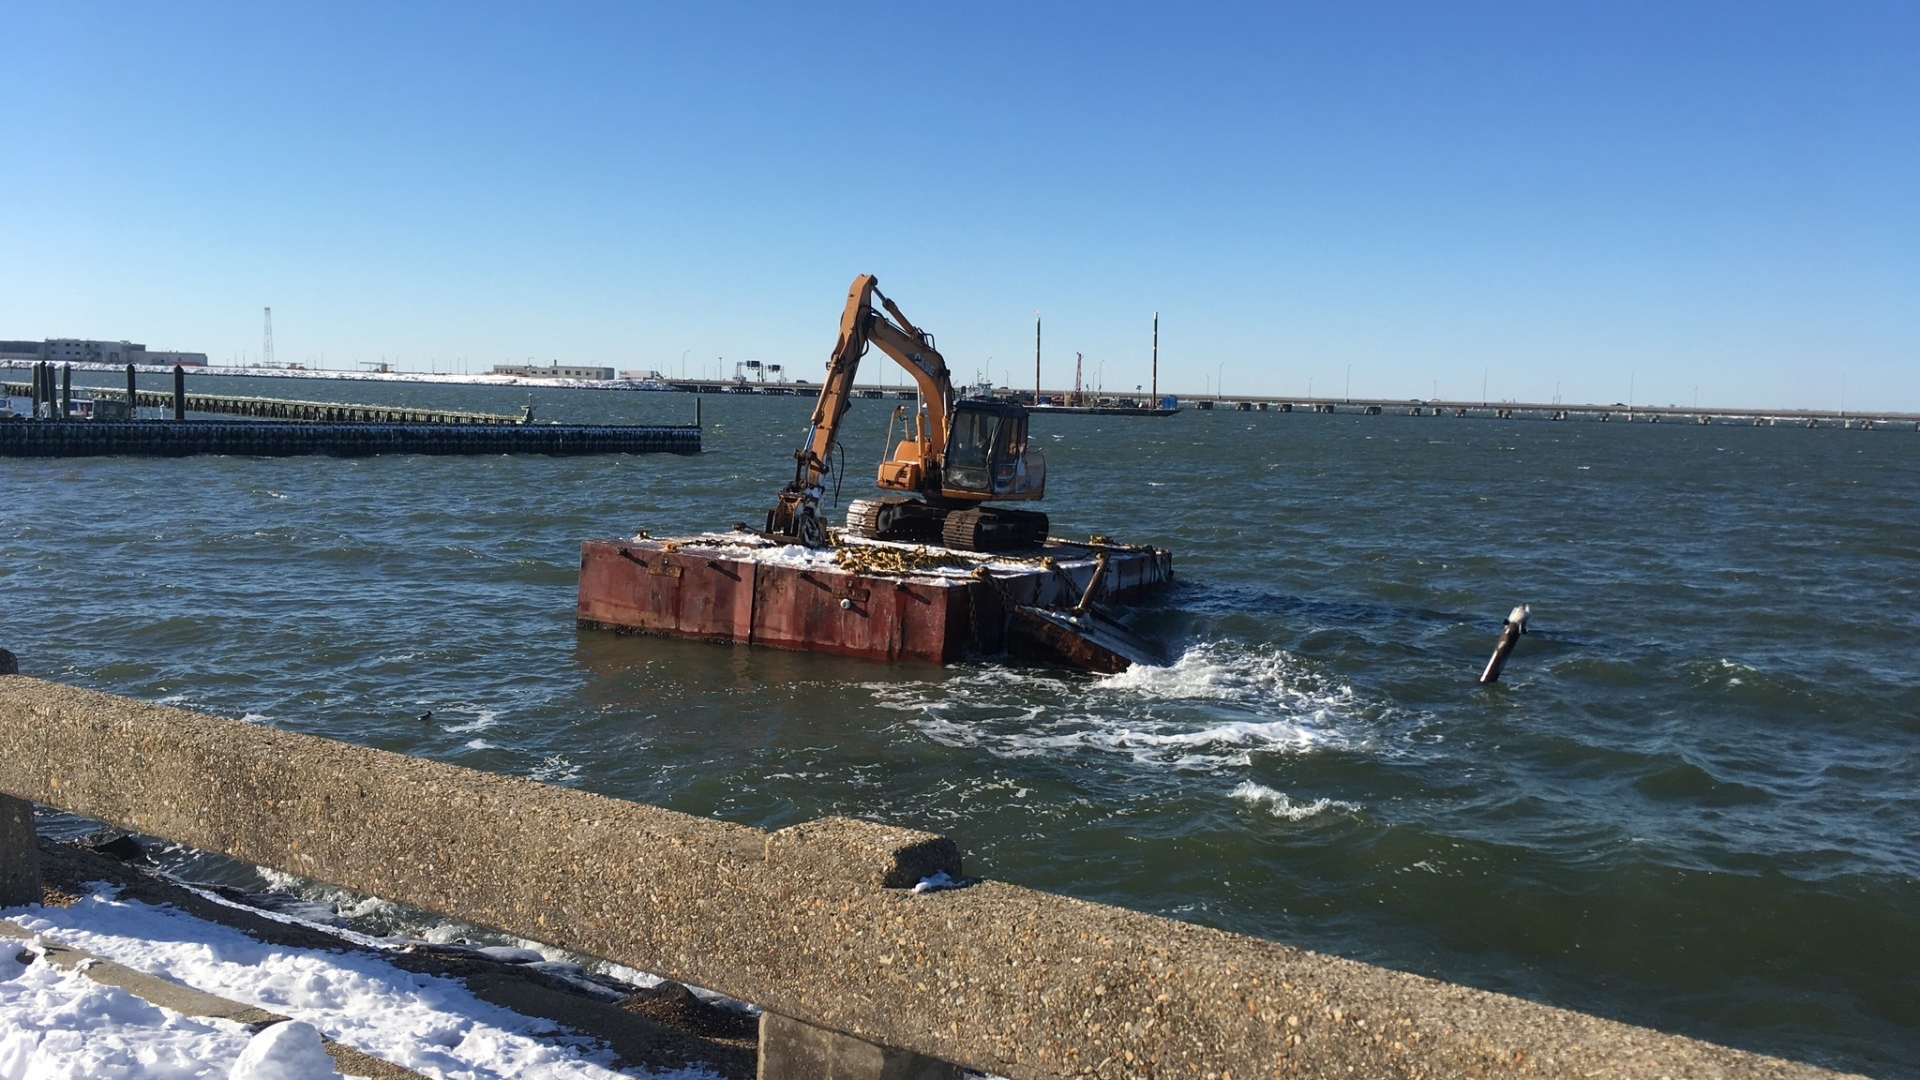 Contractor Saves Excavator From Sinking Barge Daily Press